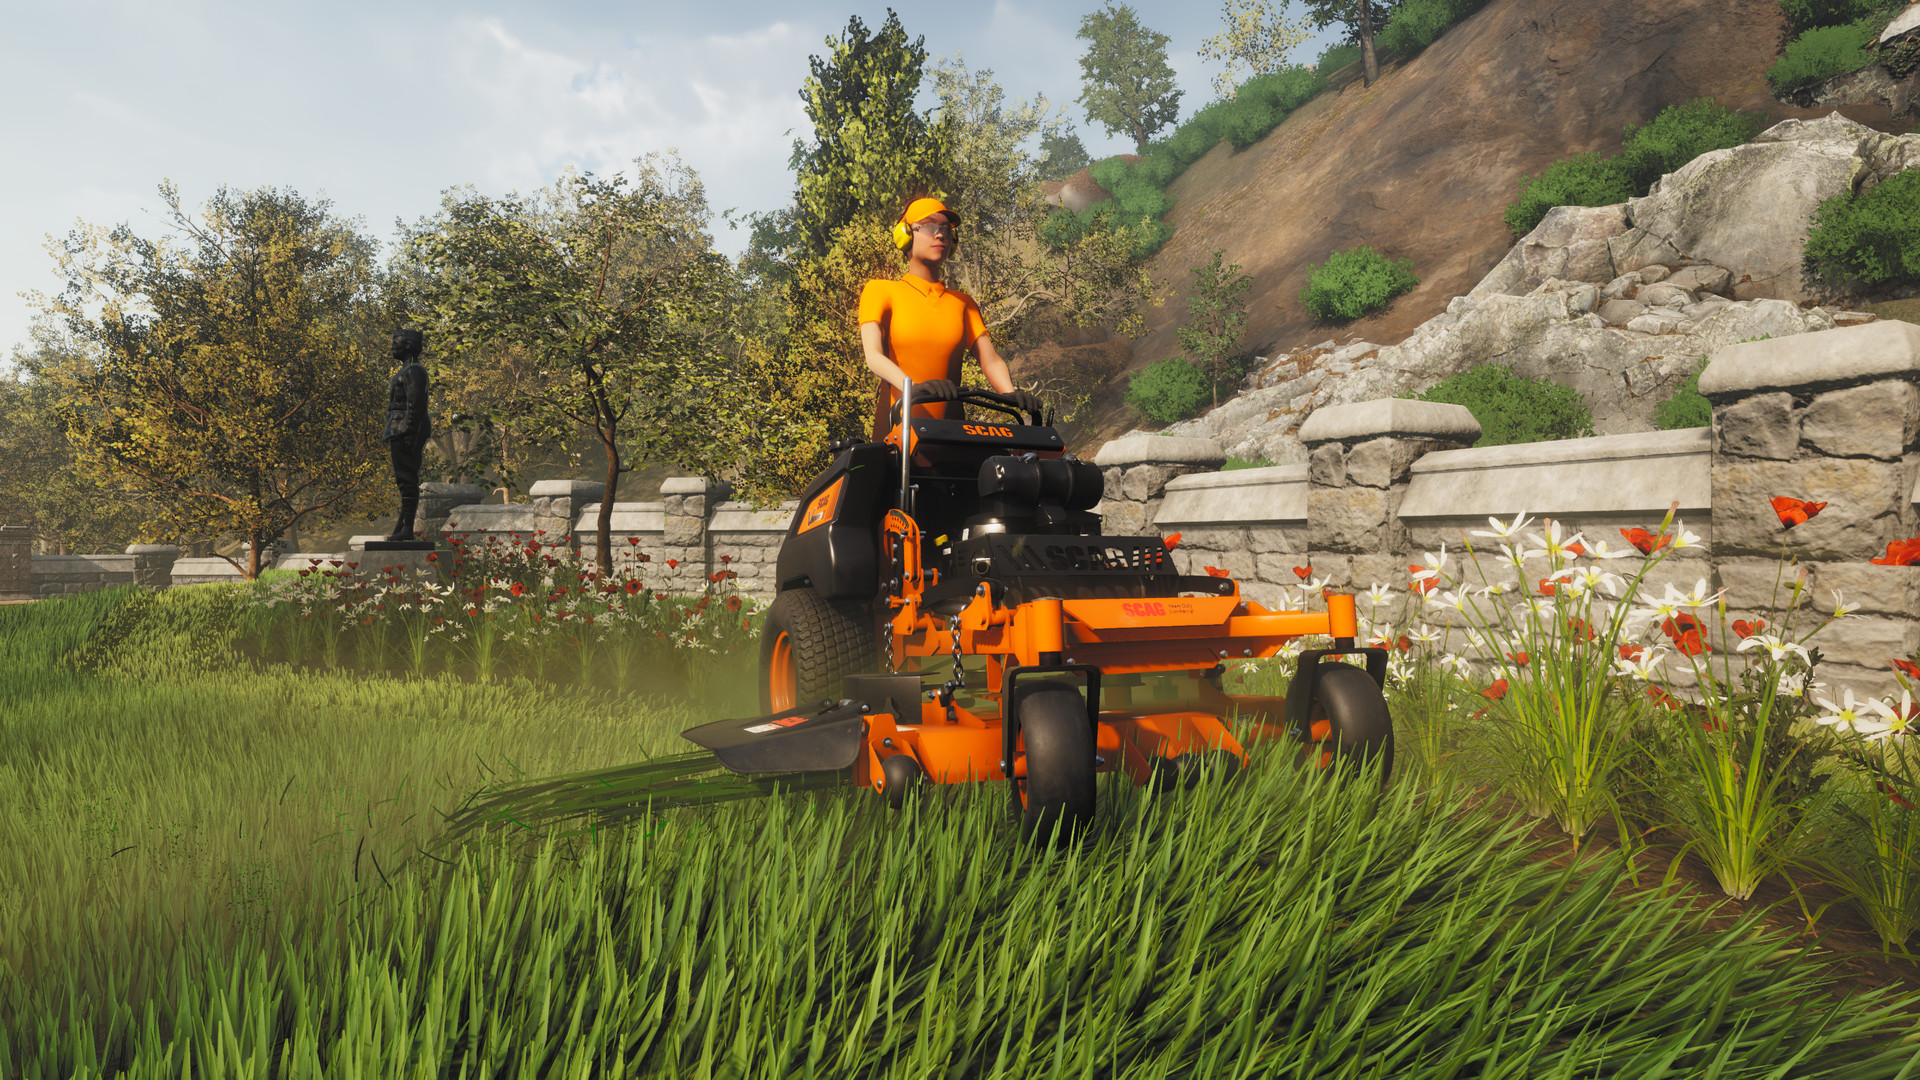 Lawn Mowing Simulator PS4 and PS5 ports